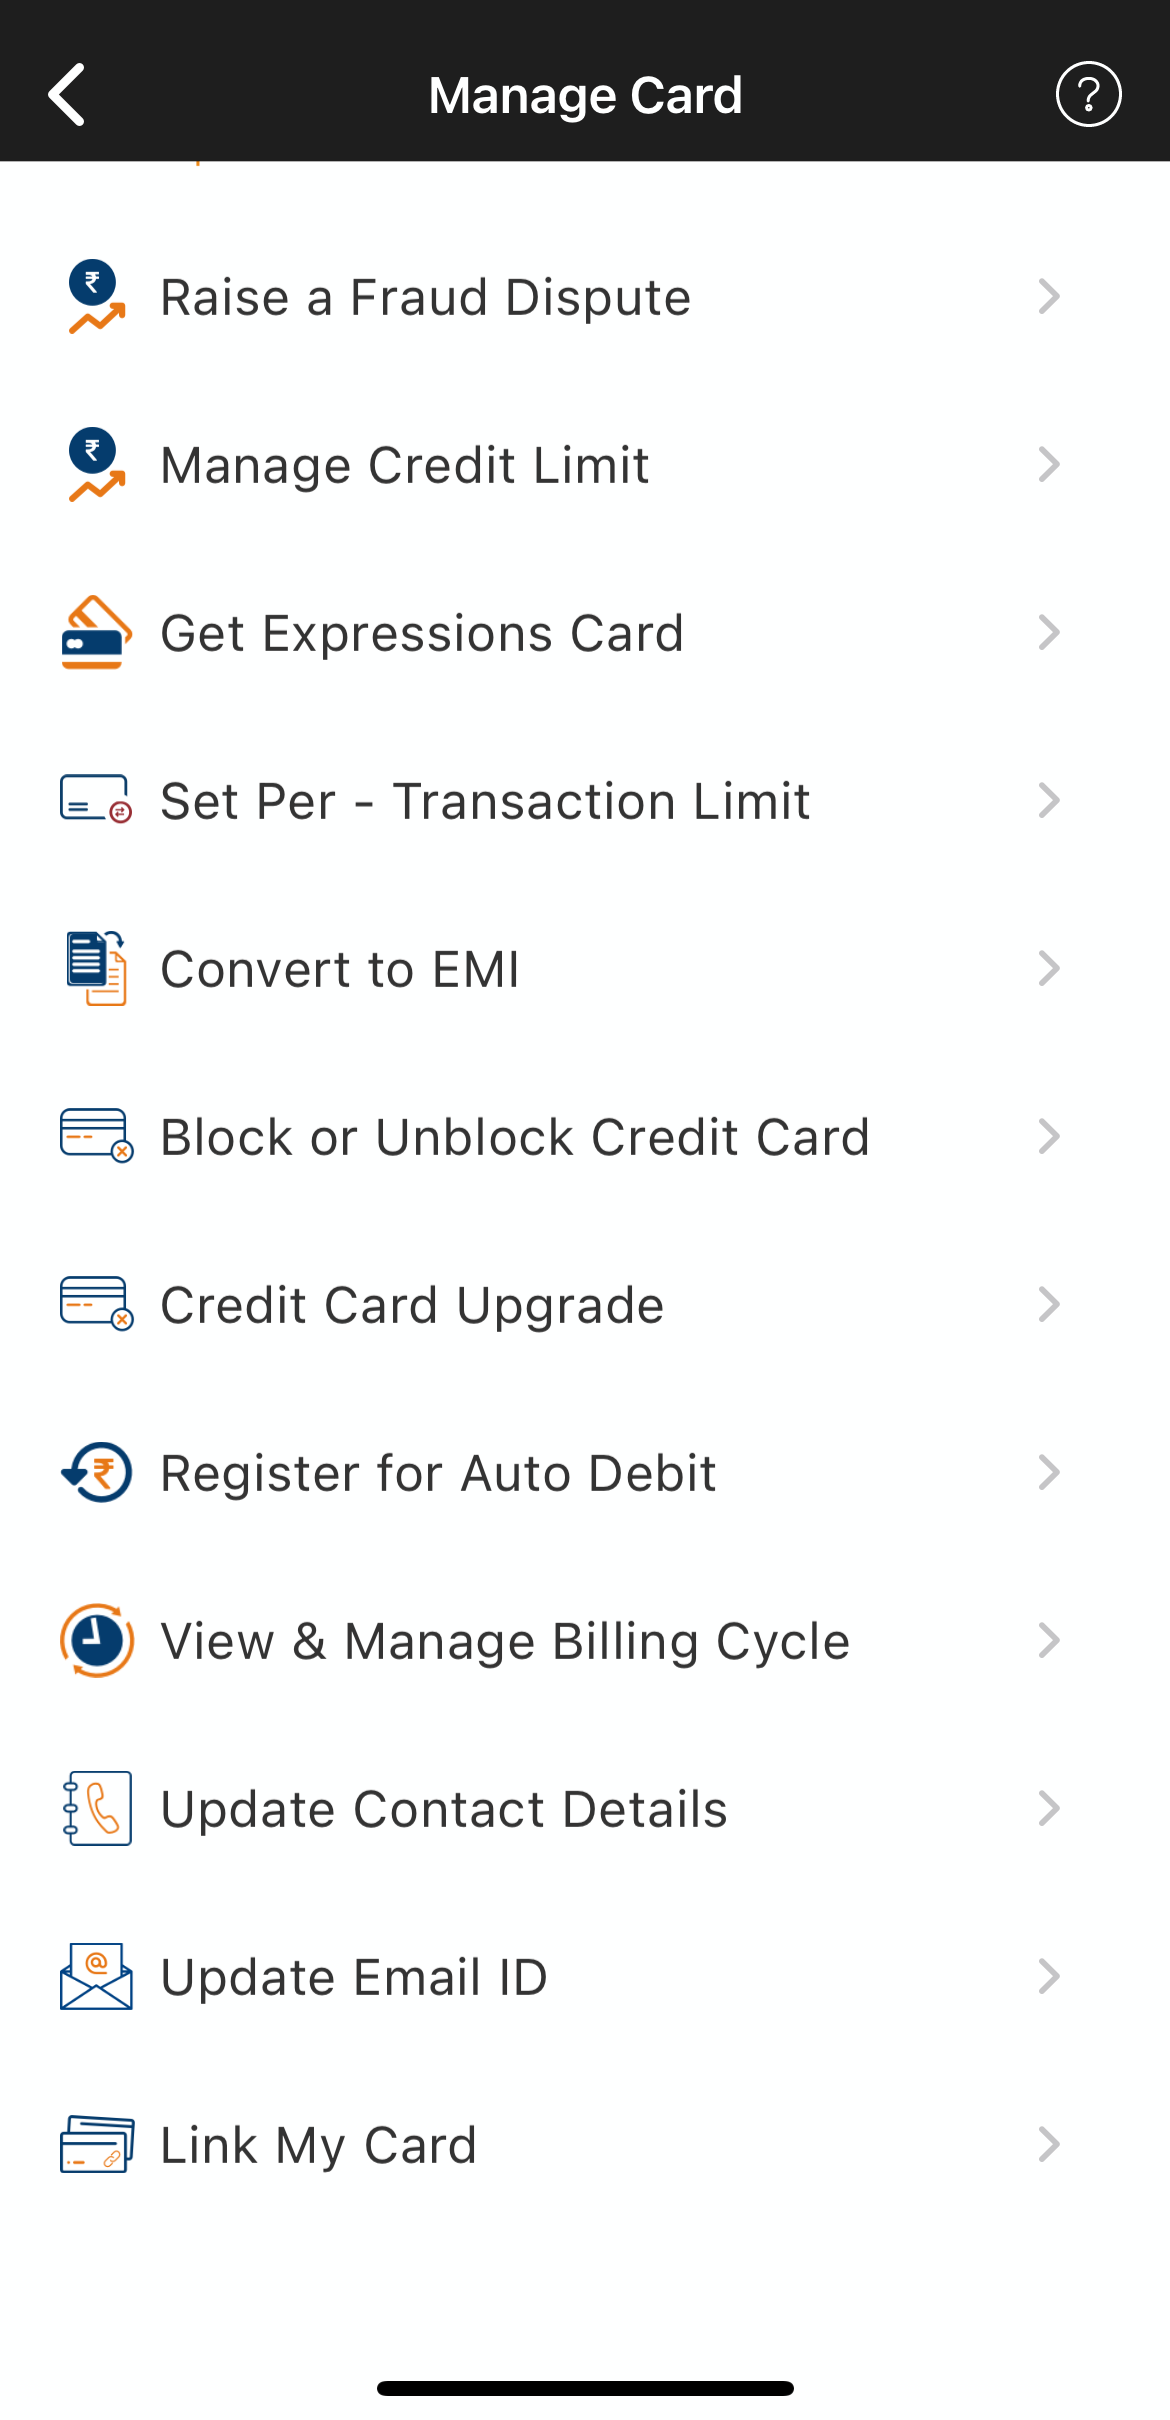 Change Statement Date of ICICI Bank Credit Card